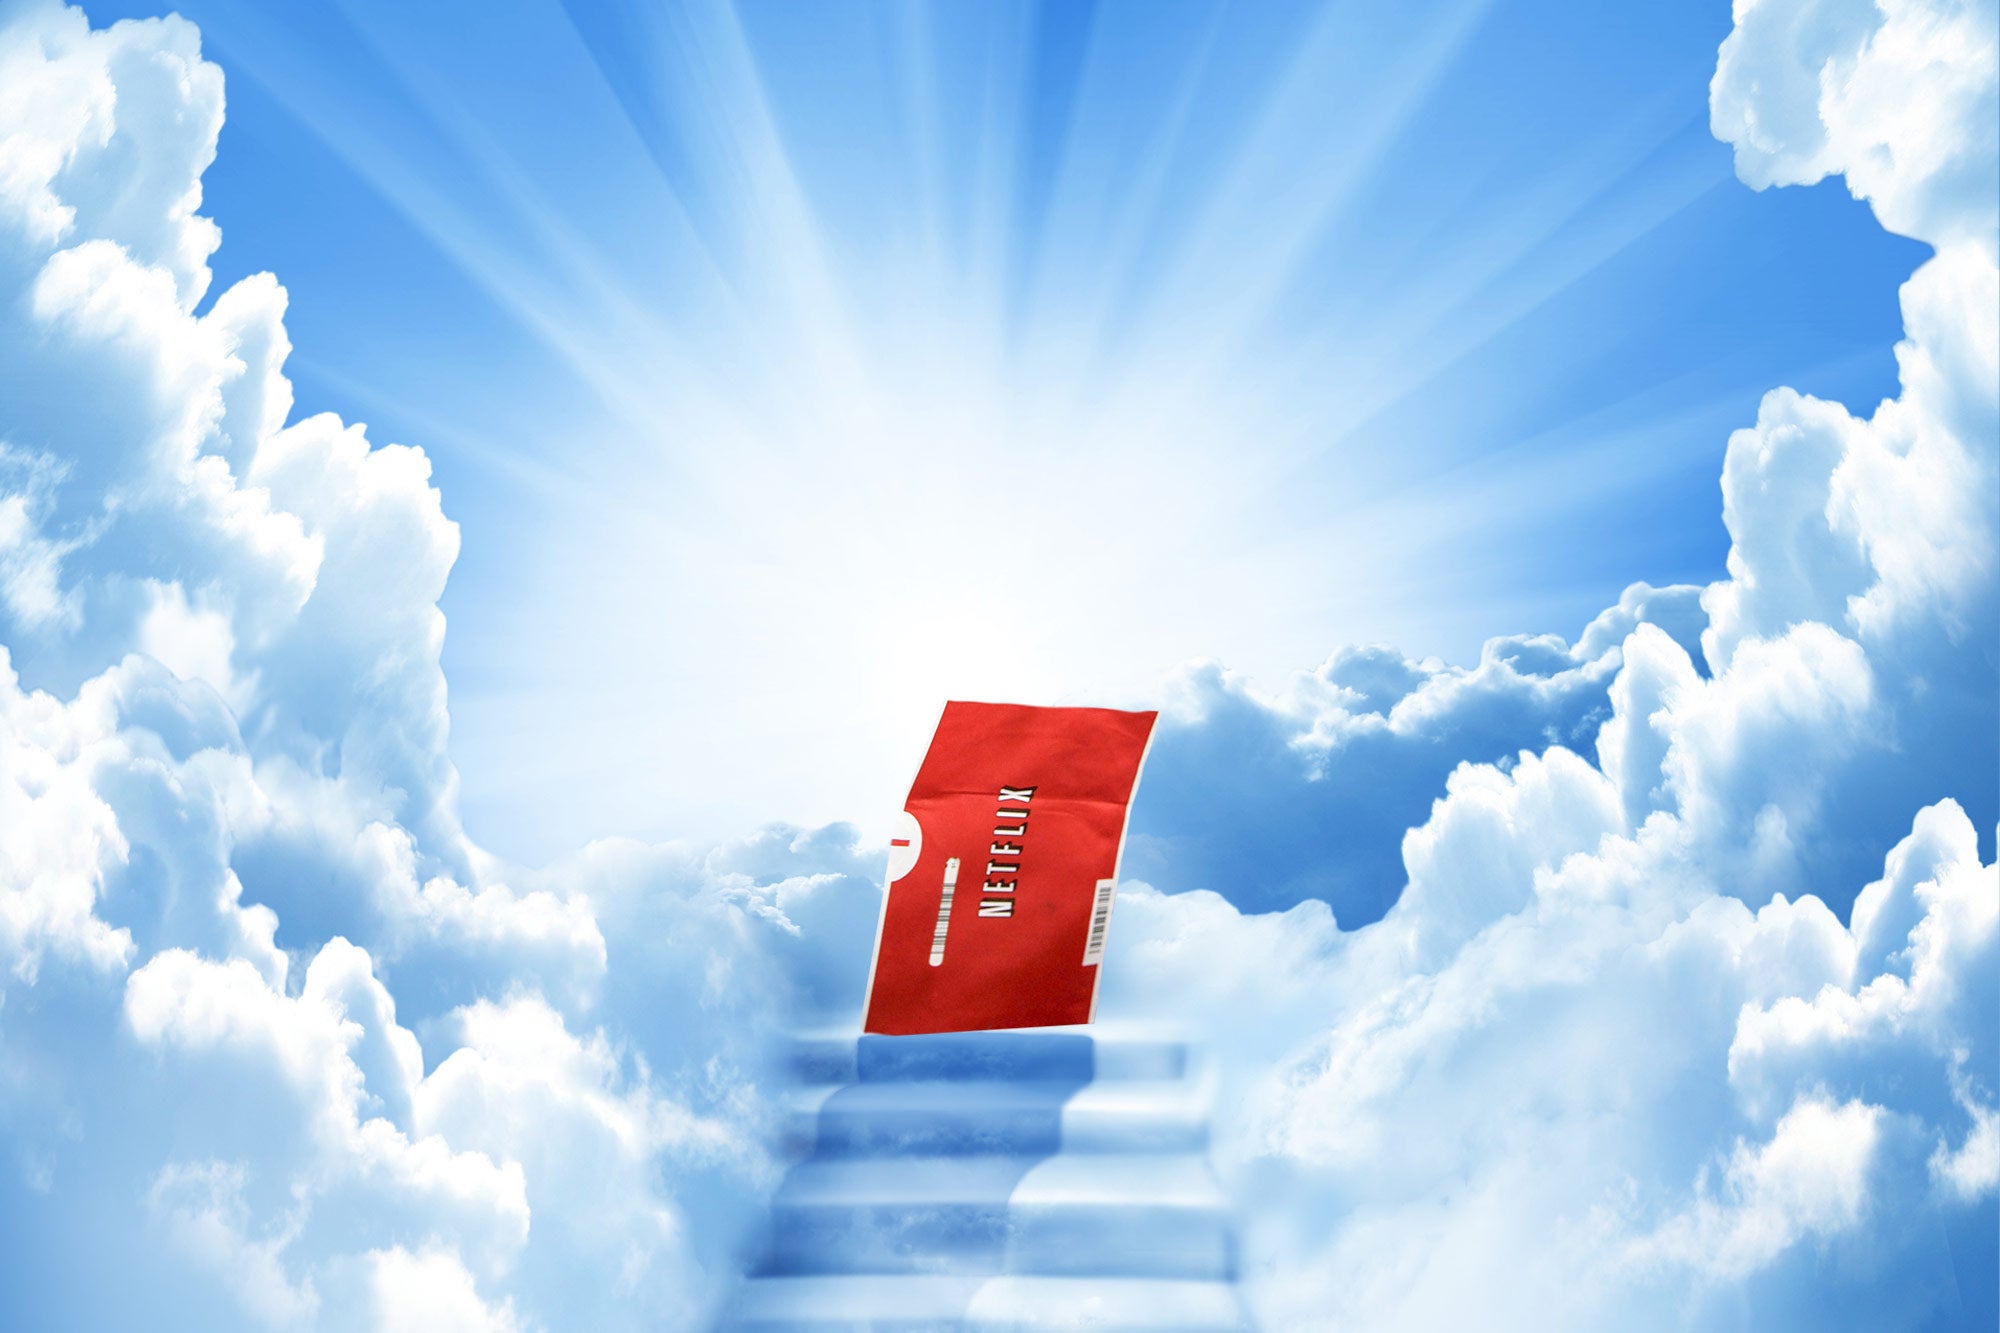 A red Netflix disc envelope climbs the brightly illuminated stairs through the clouds to heaven. 